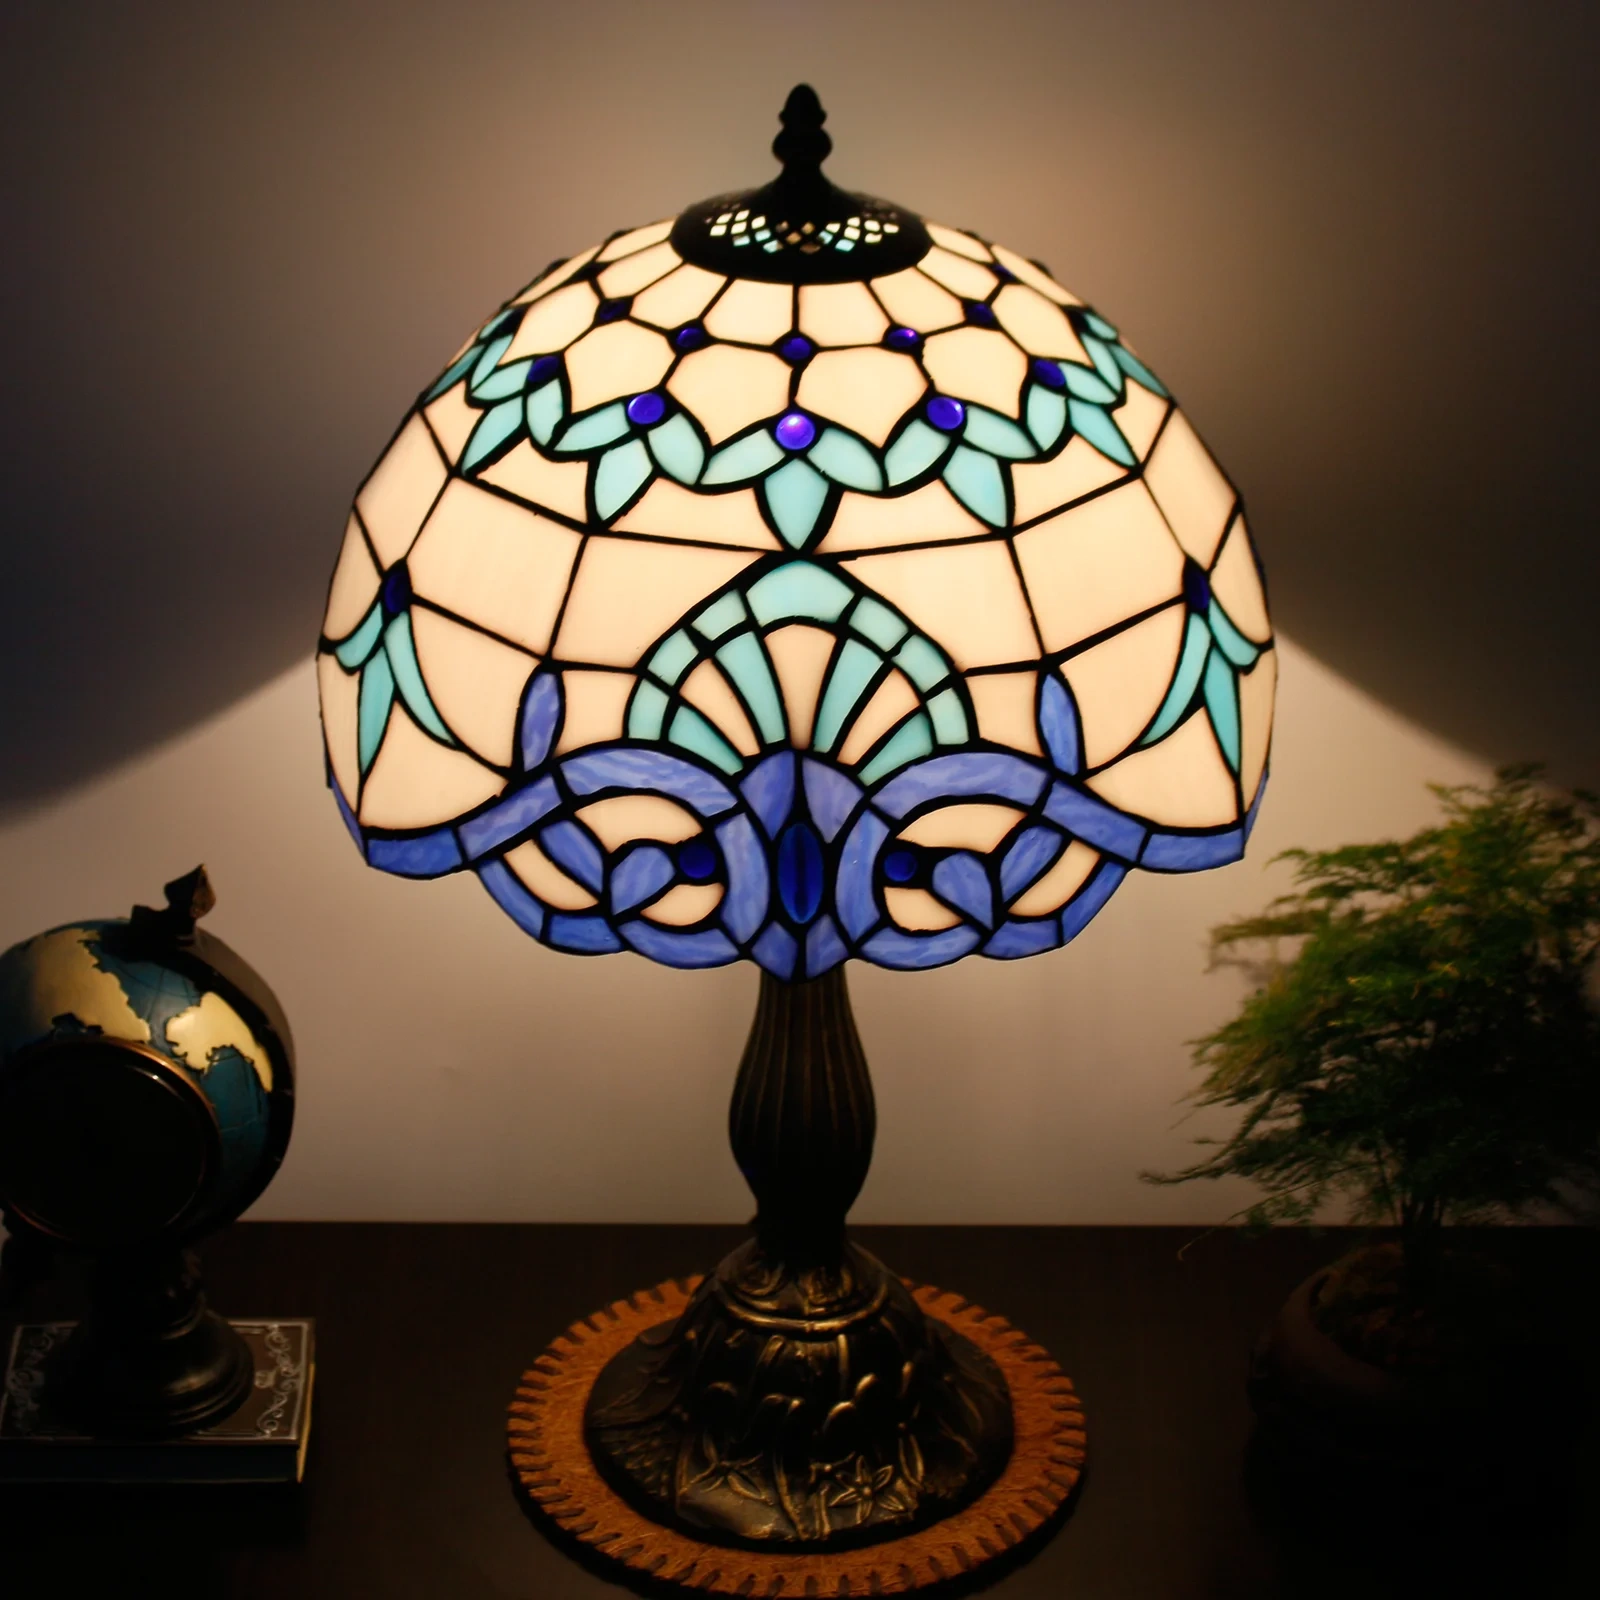 Tiffany Table Lamp Bedside Navy Blue Baroque Stained Glass Style Desk Reading Light 18